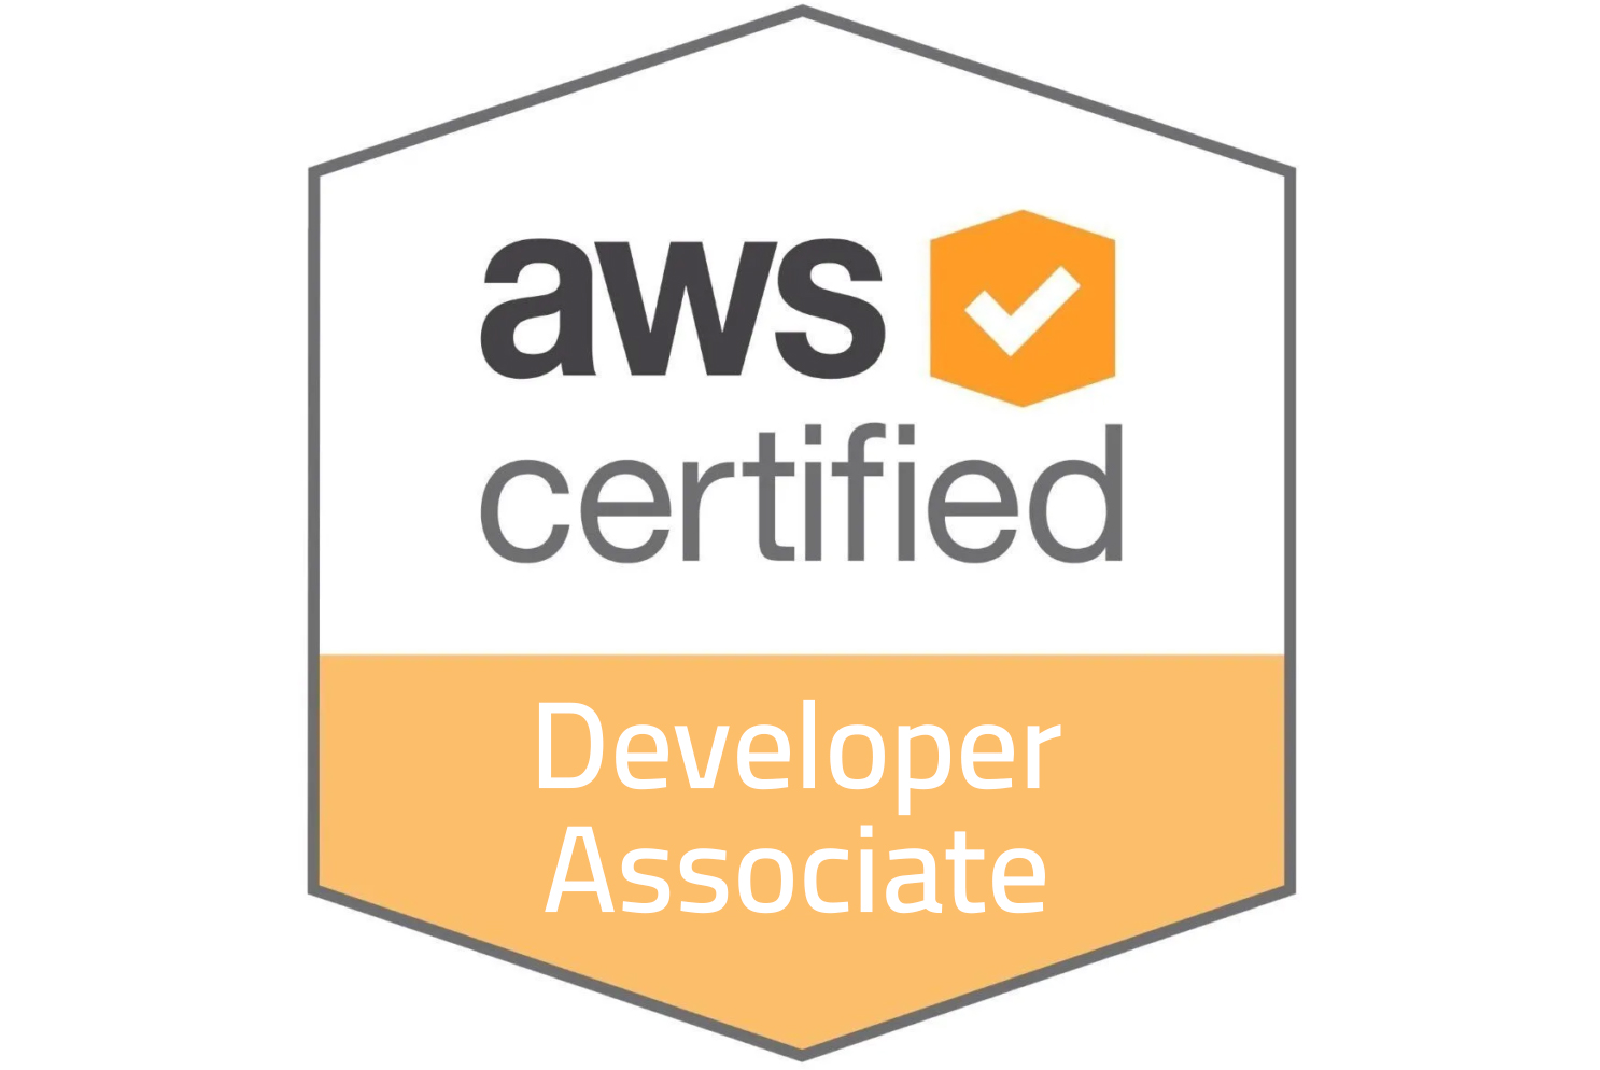 AWS Course Online | Training and Certification in AWS